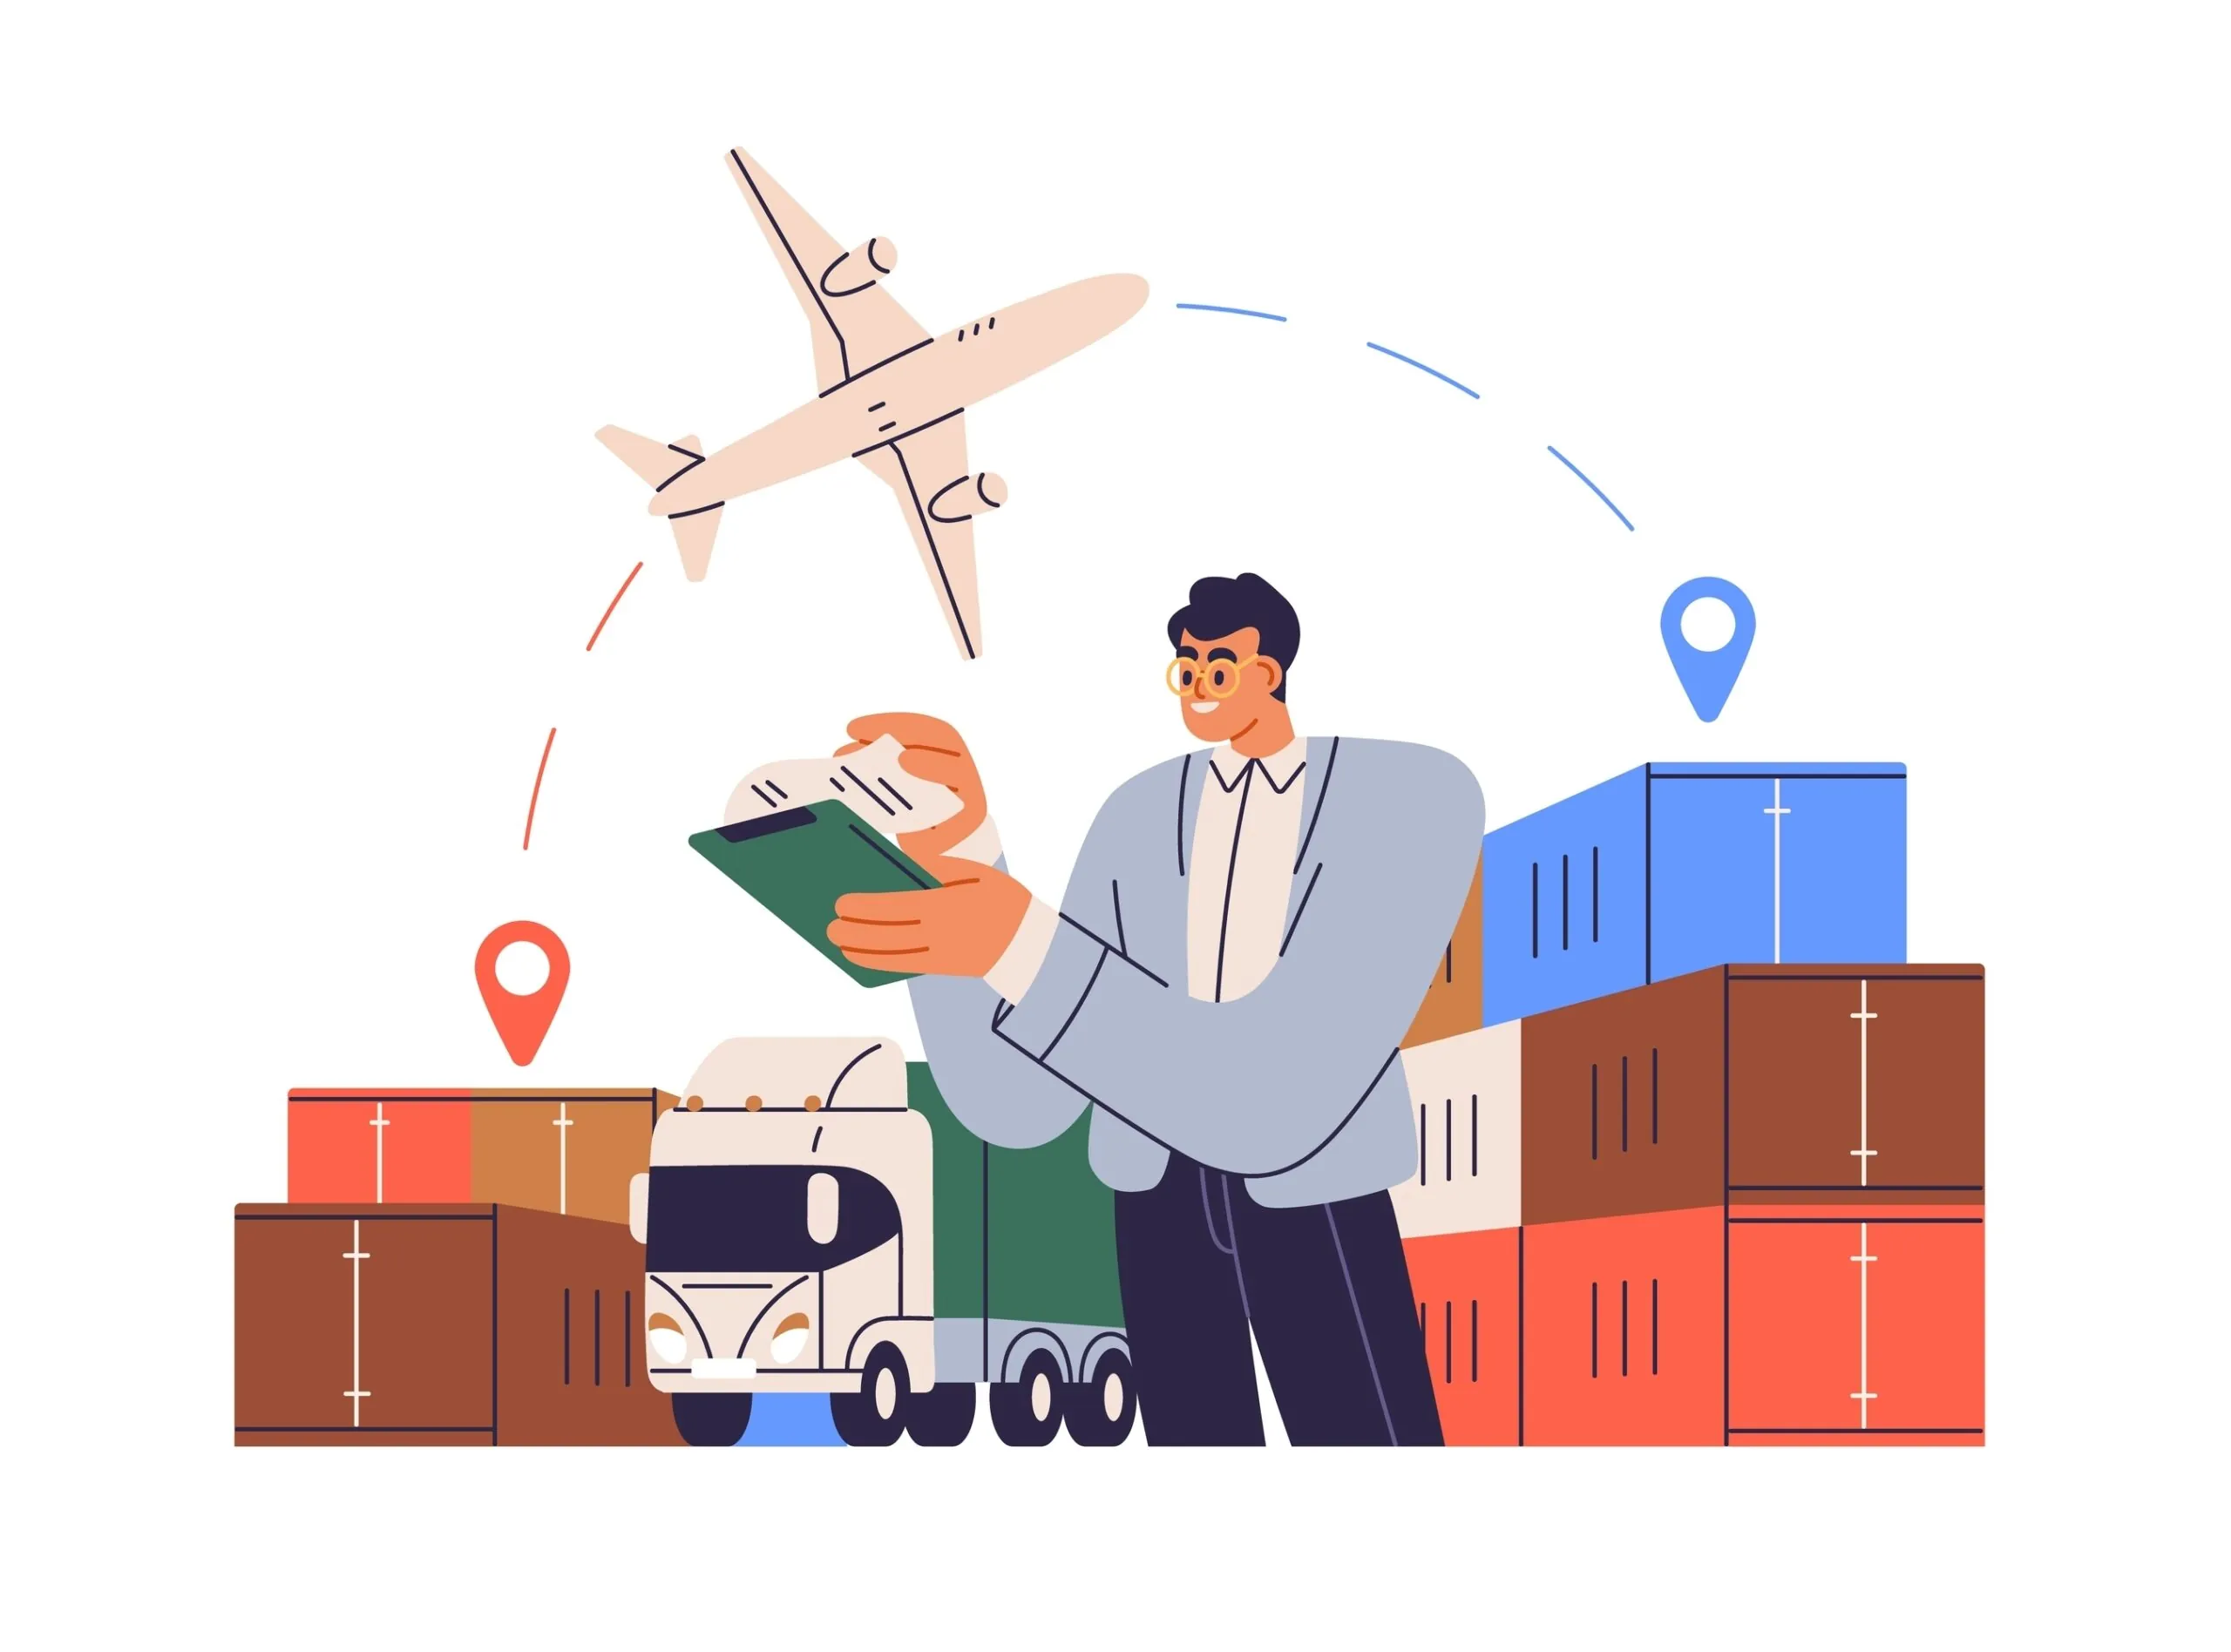 Shipping Hardwood Floors - Shipping regulations custom inspector at freight transportation center inspecting documents with plane flying overhead illustration